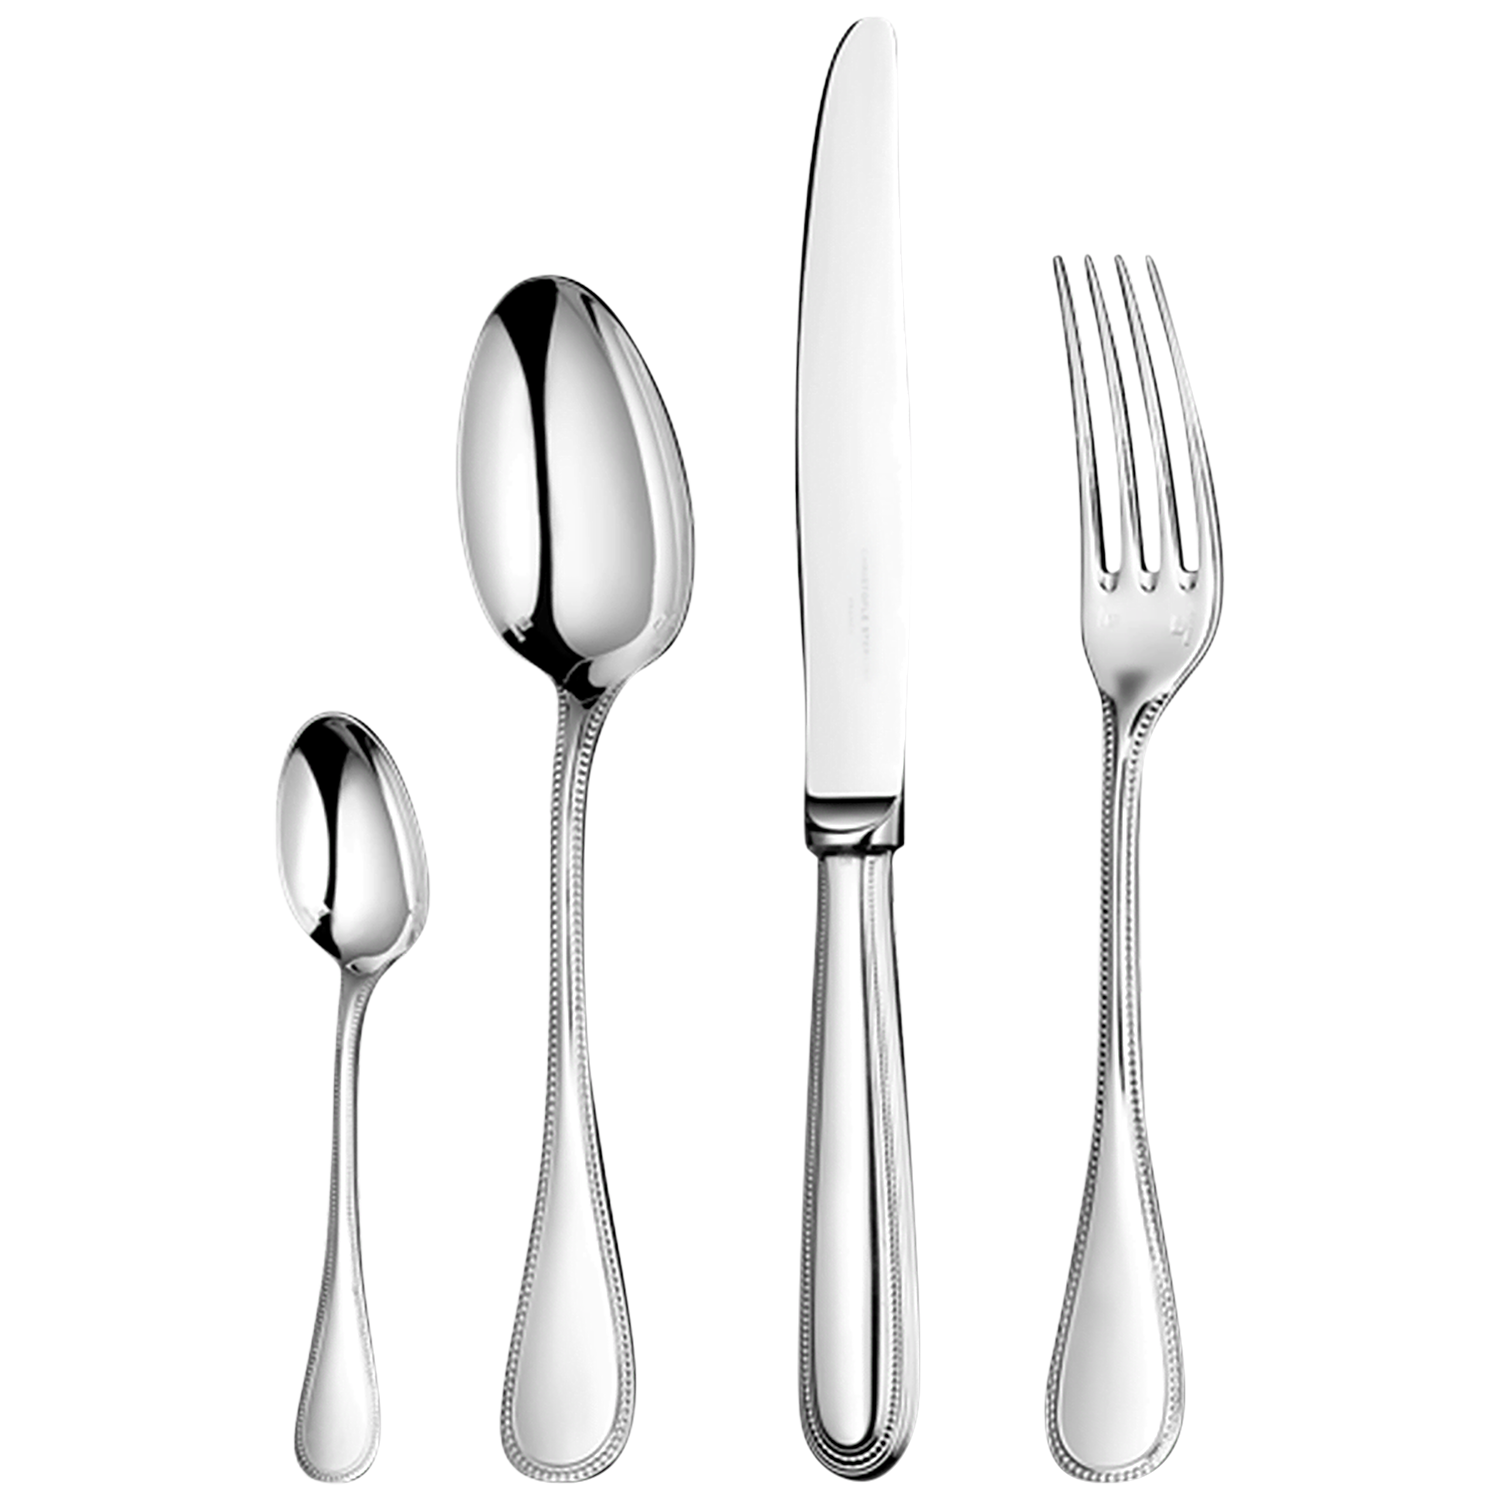 110-Piece Silver-Plated flatware set with imperial chest